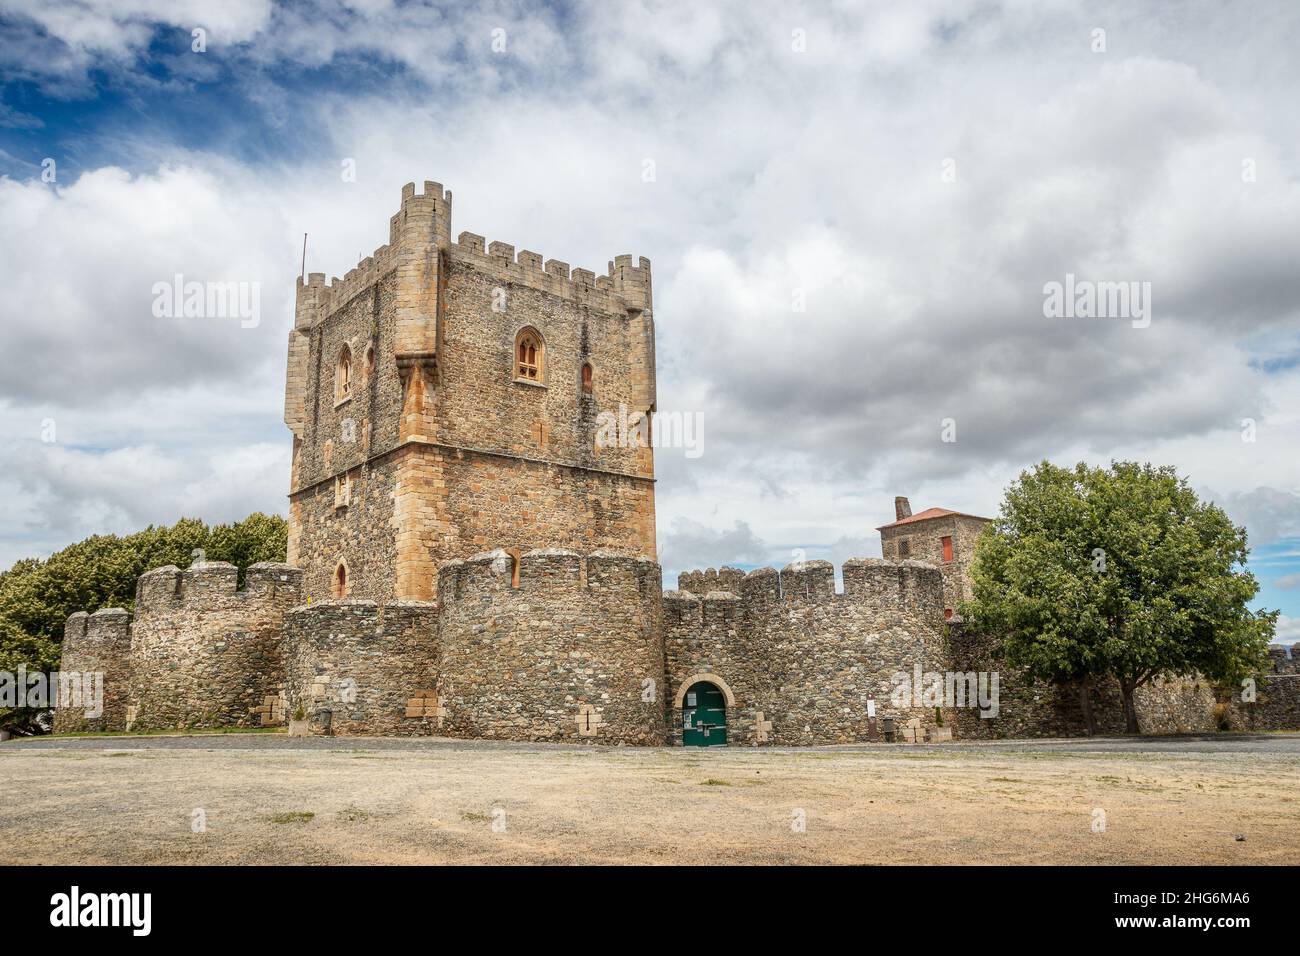 Bragança, Portugal - June 27, 2021: Keep and interior walls of the castle of Bragança in Portugal, with clouds in the background. Stock Photo